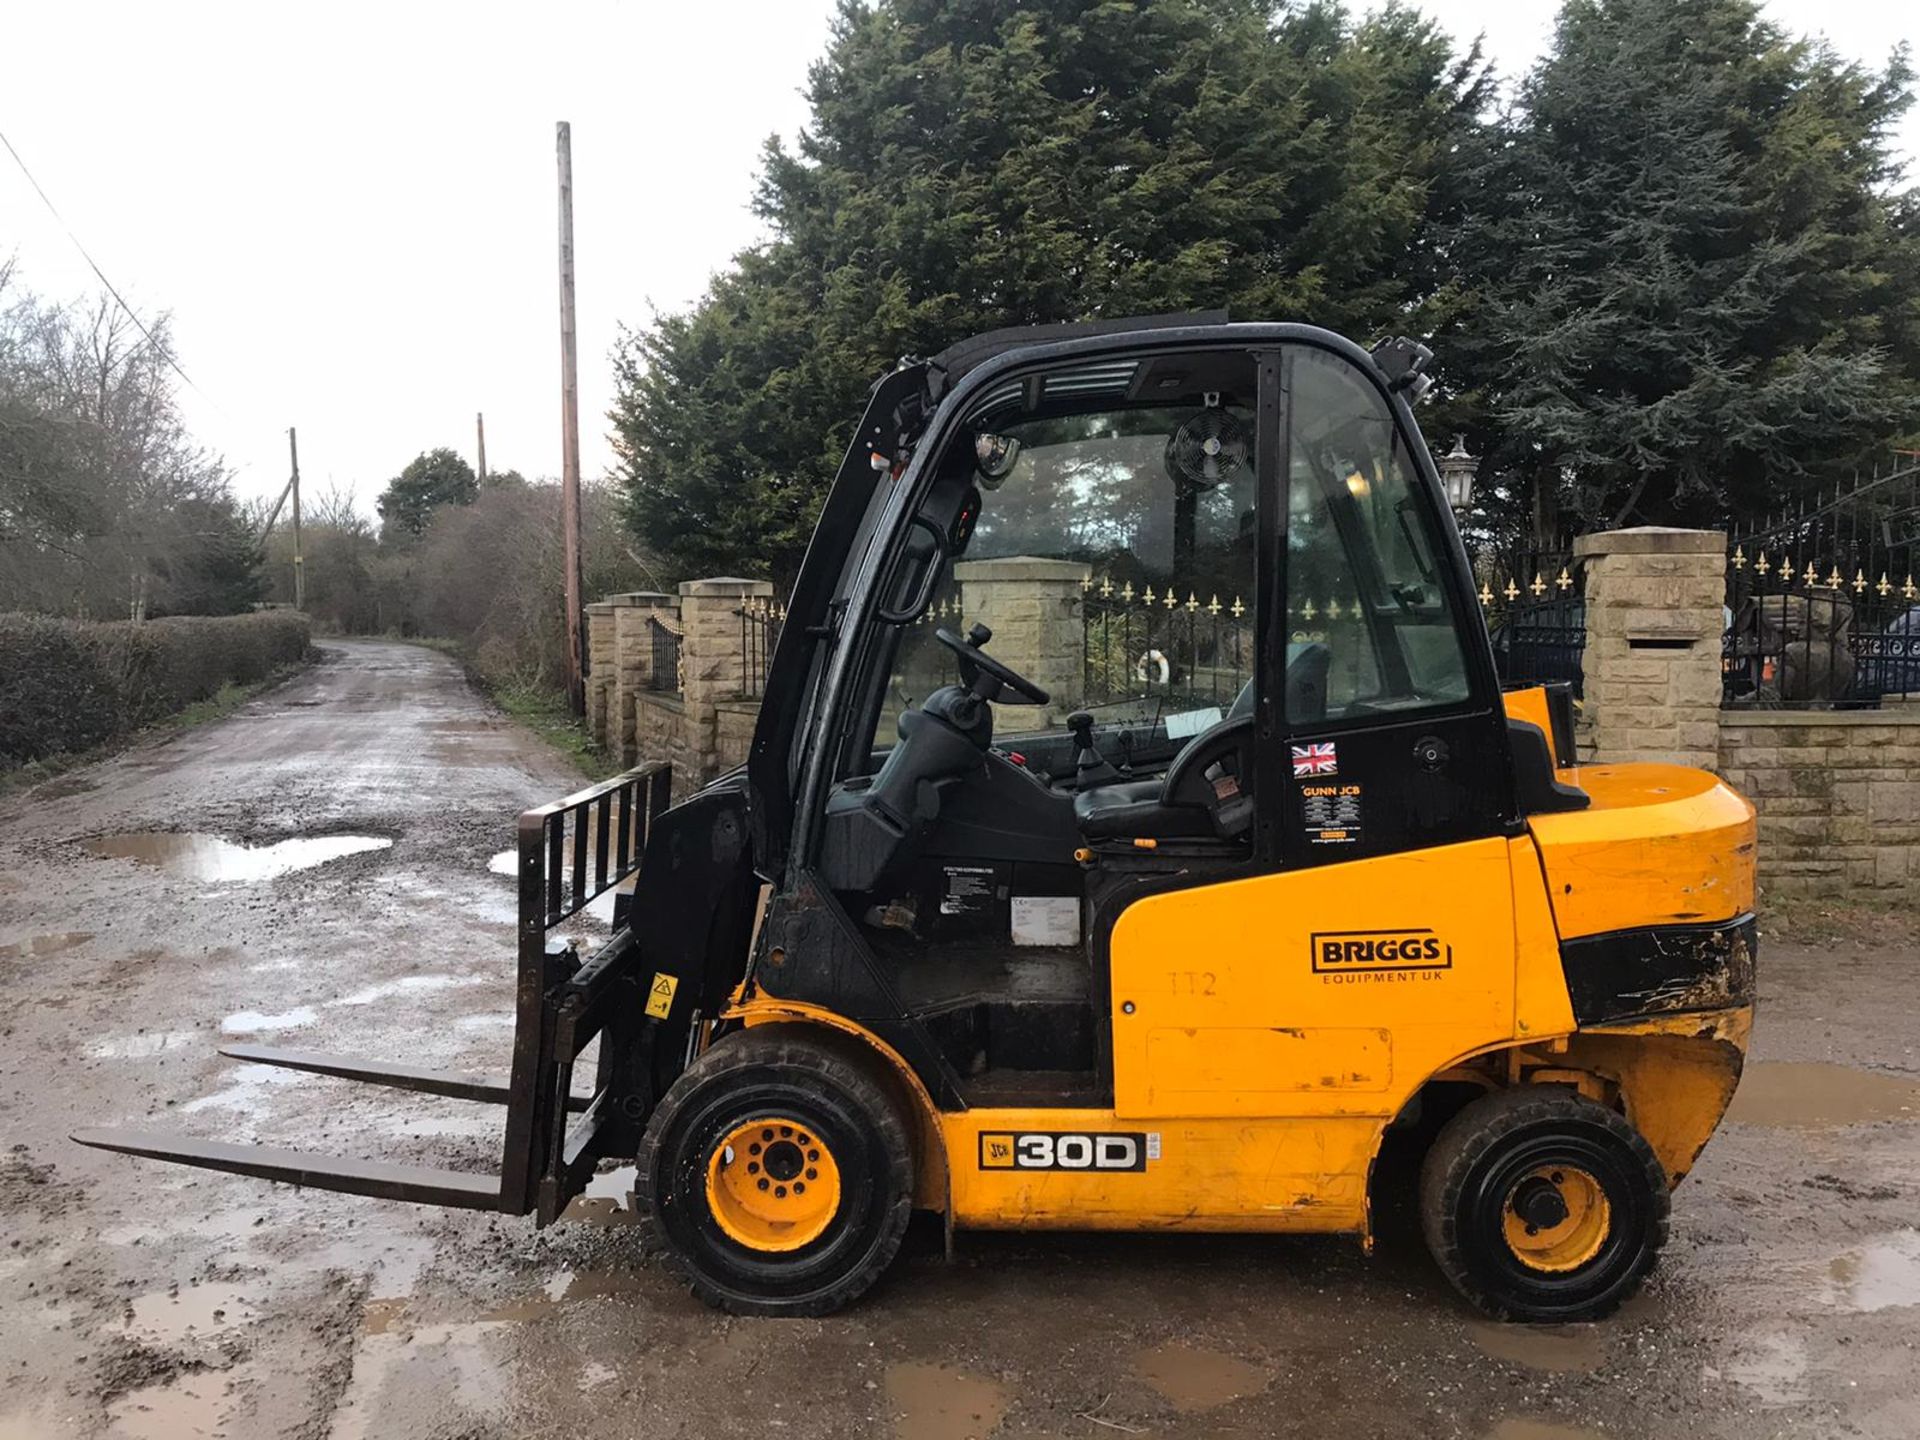 JCB TLT 30 TELETRUK, YEAR 2014, POWER 35.6 KW, WEIGHT 4900 KG, RUNS, WORKS AND LIFTS *PLUS VAT* - Image 2 of 6